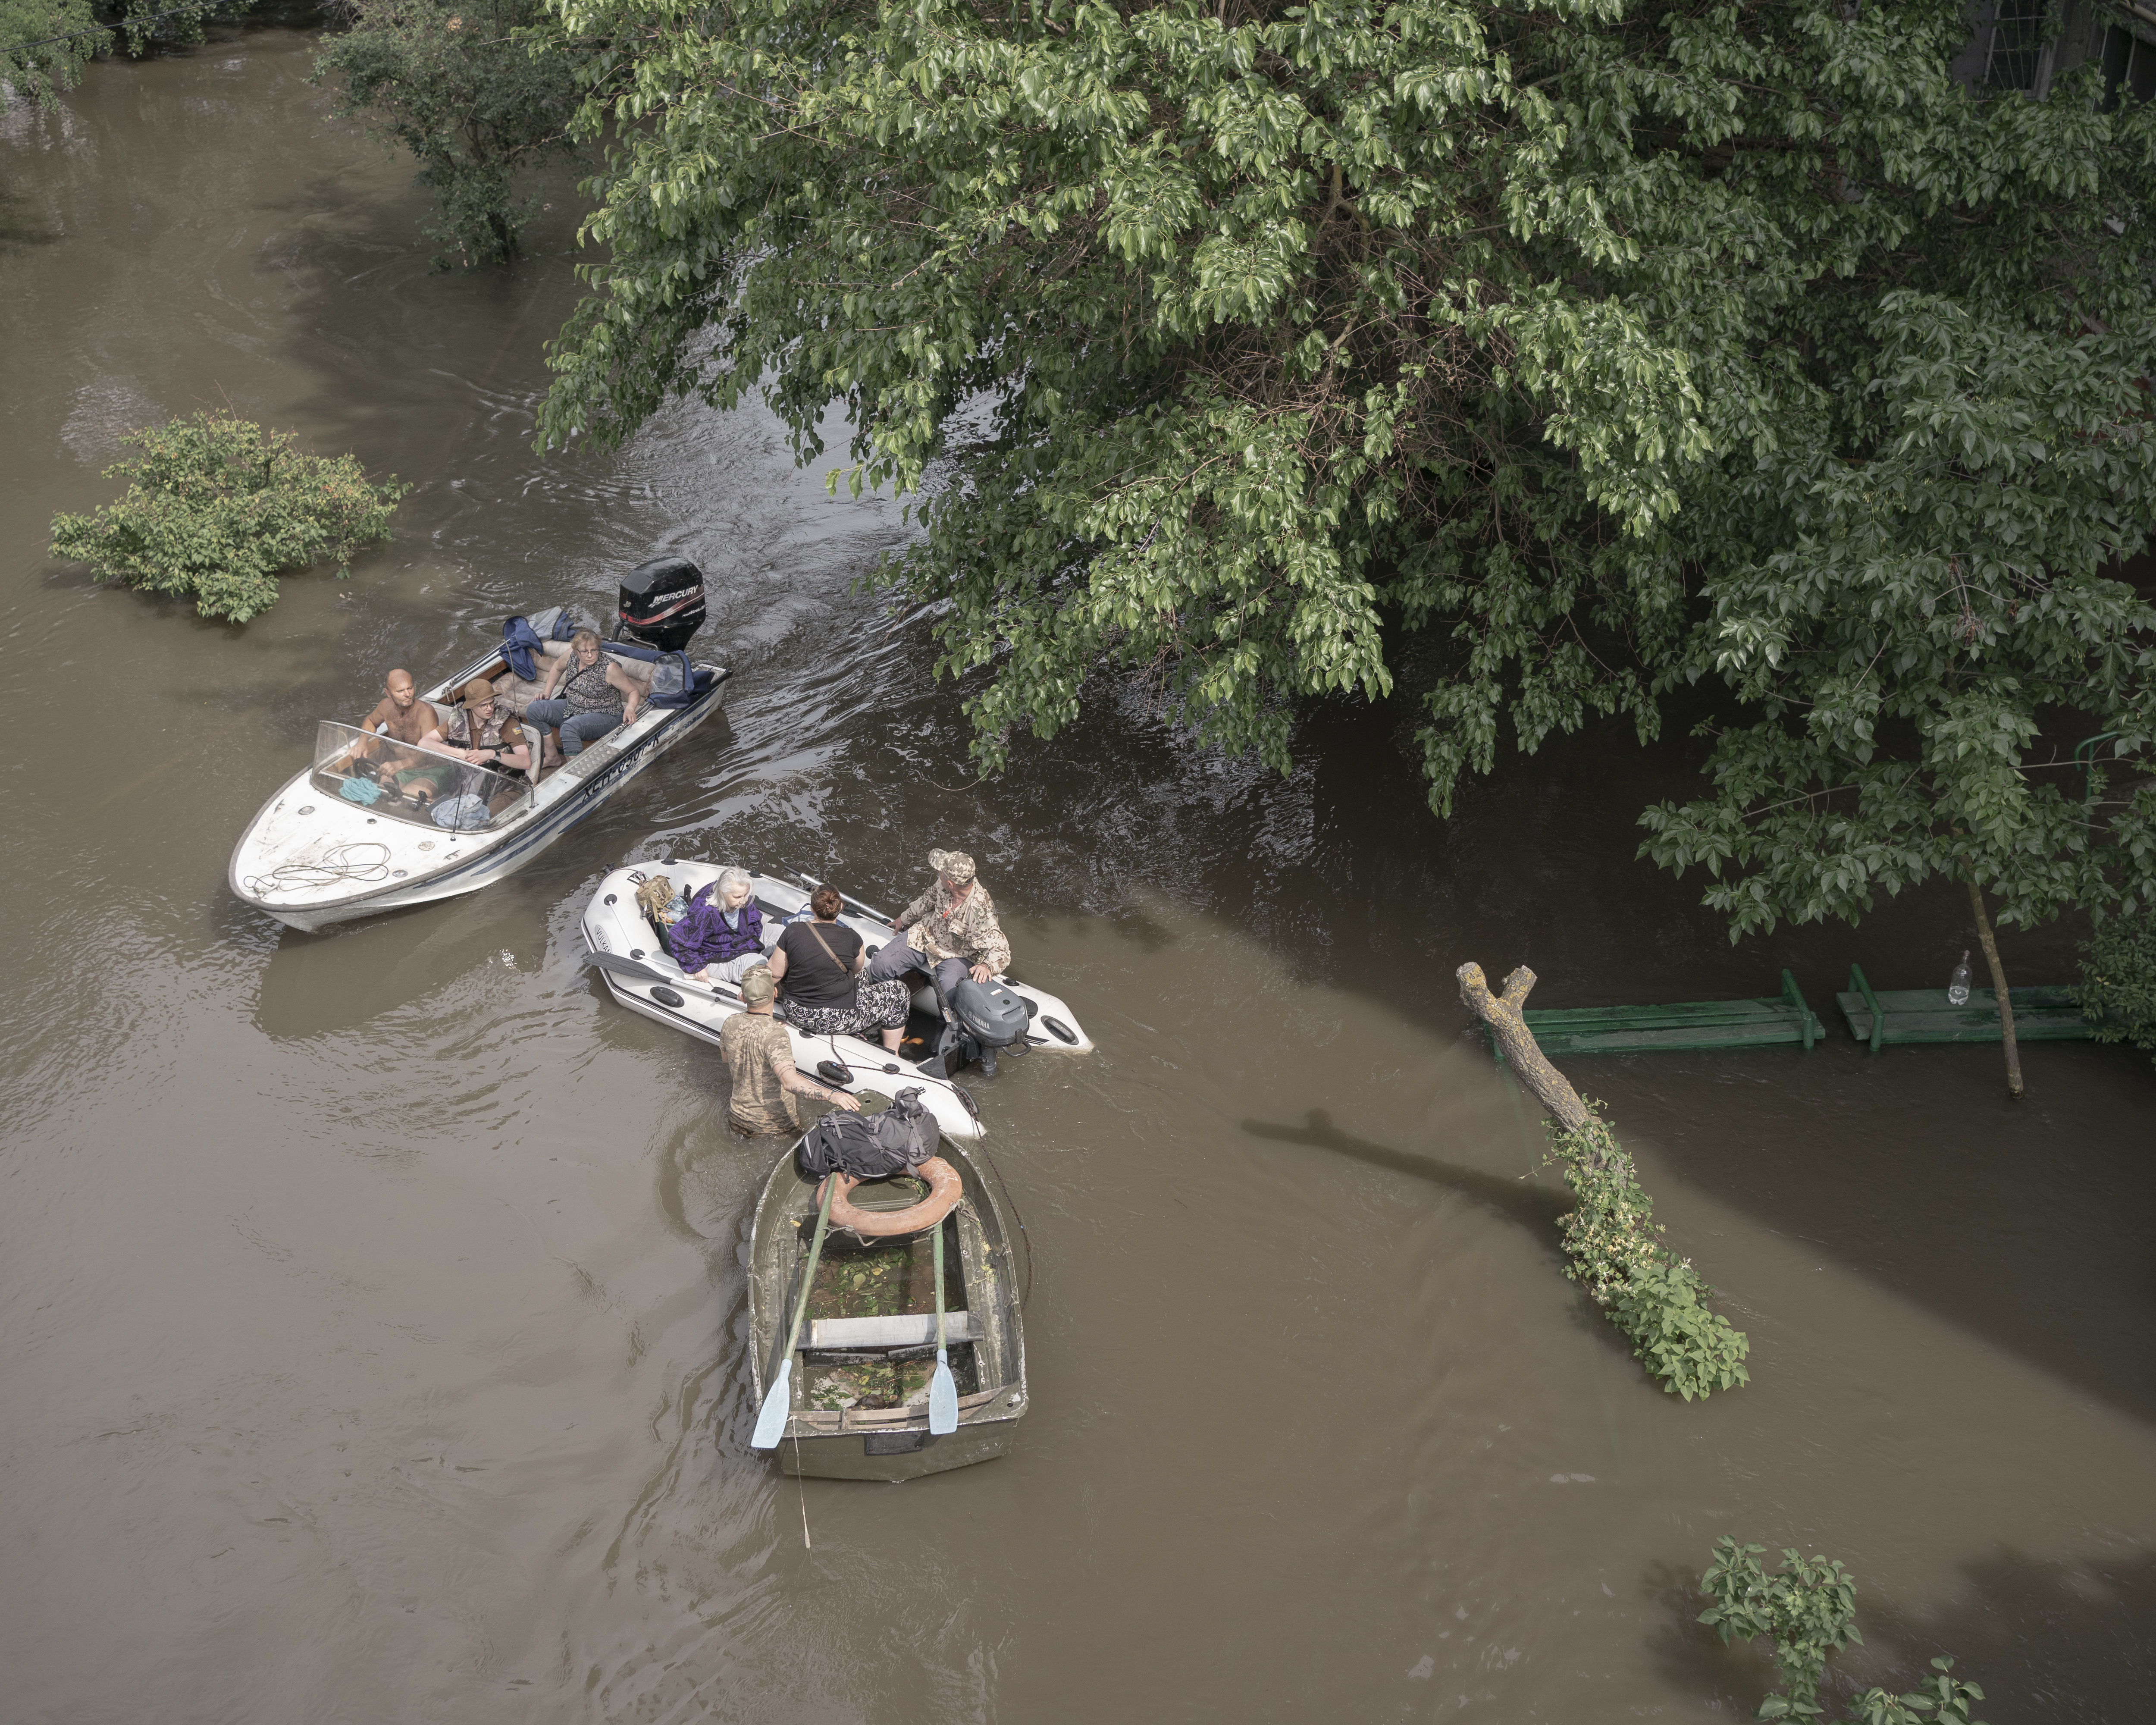 People gather together in three small boats in a flooded tree-filled area